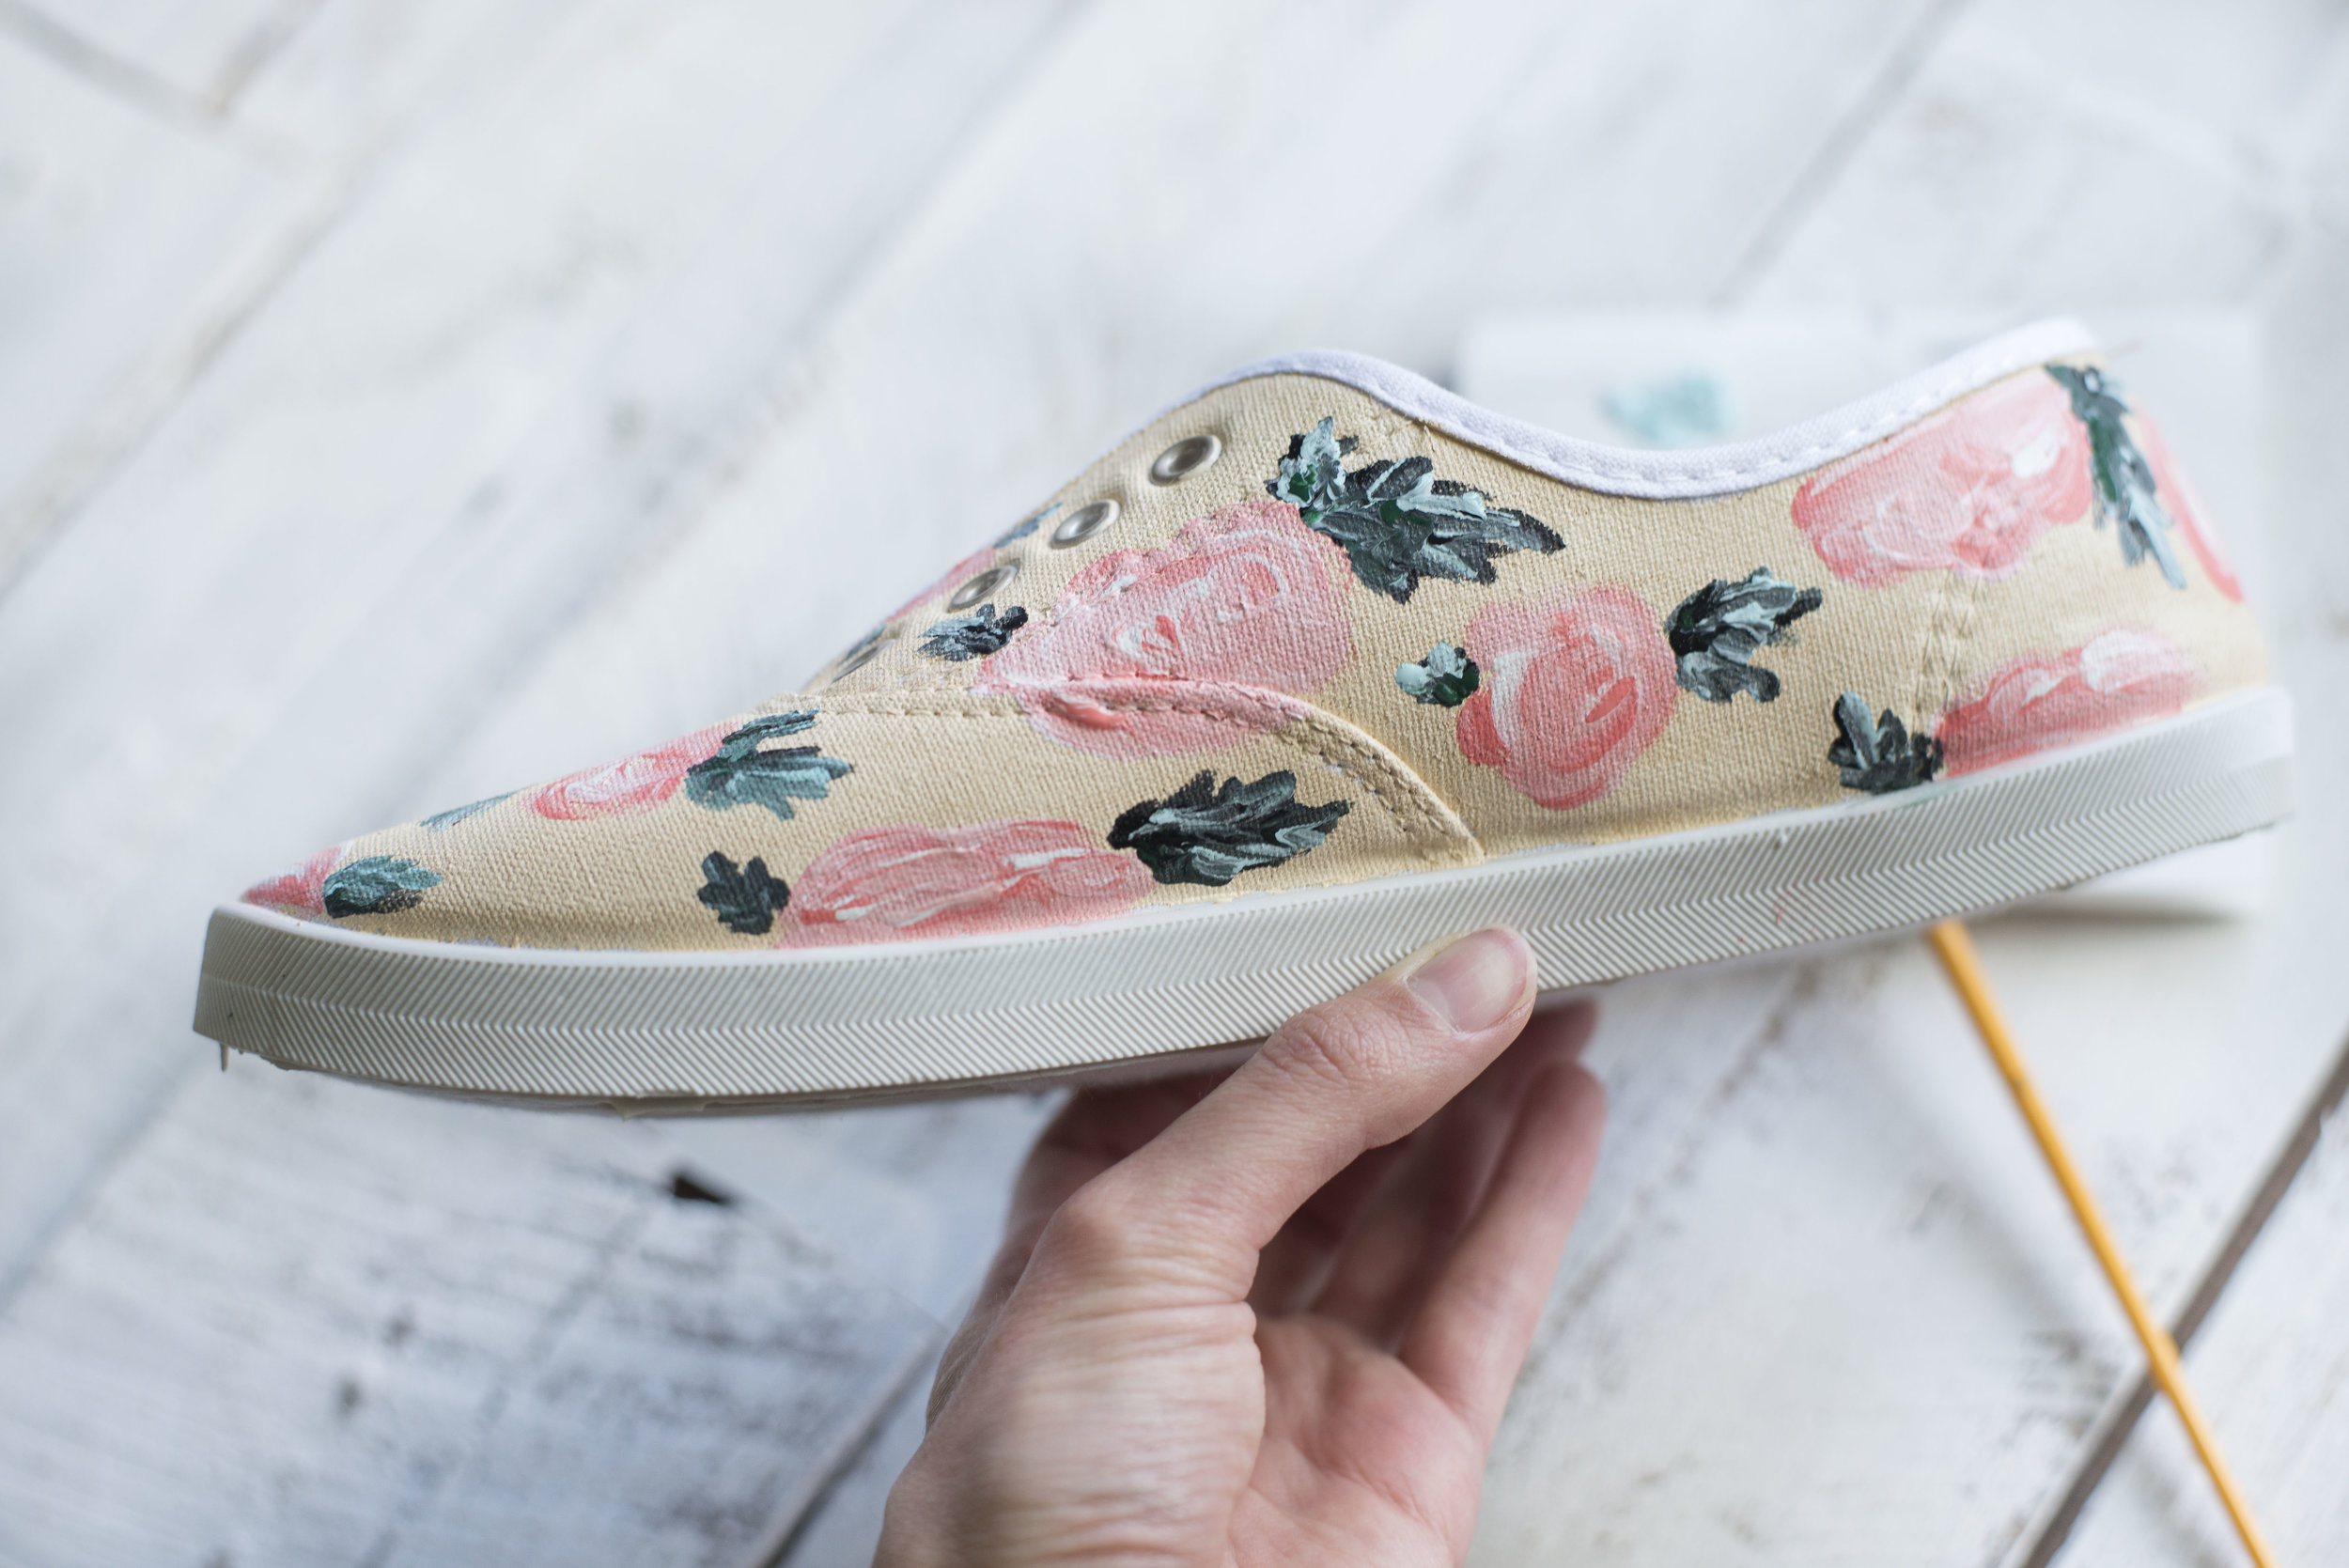 Other Sizes and Paintings Available by Special Order. Hand Painted Roses Slip-On Shoes Schoenen damesschoenen Instappers Loafers 